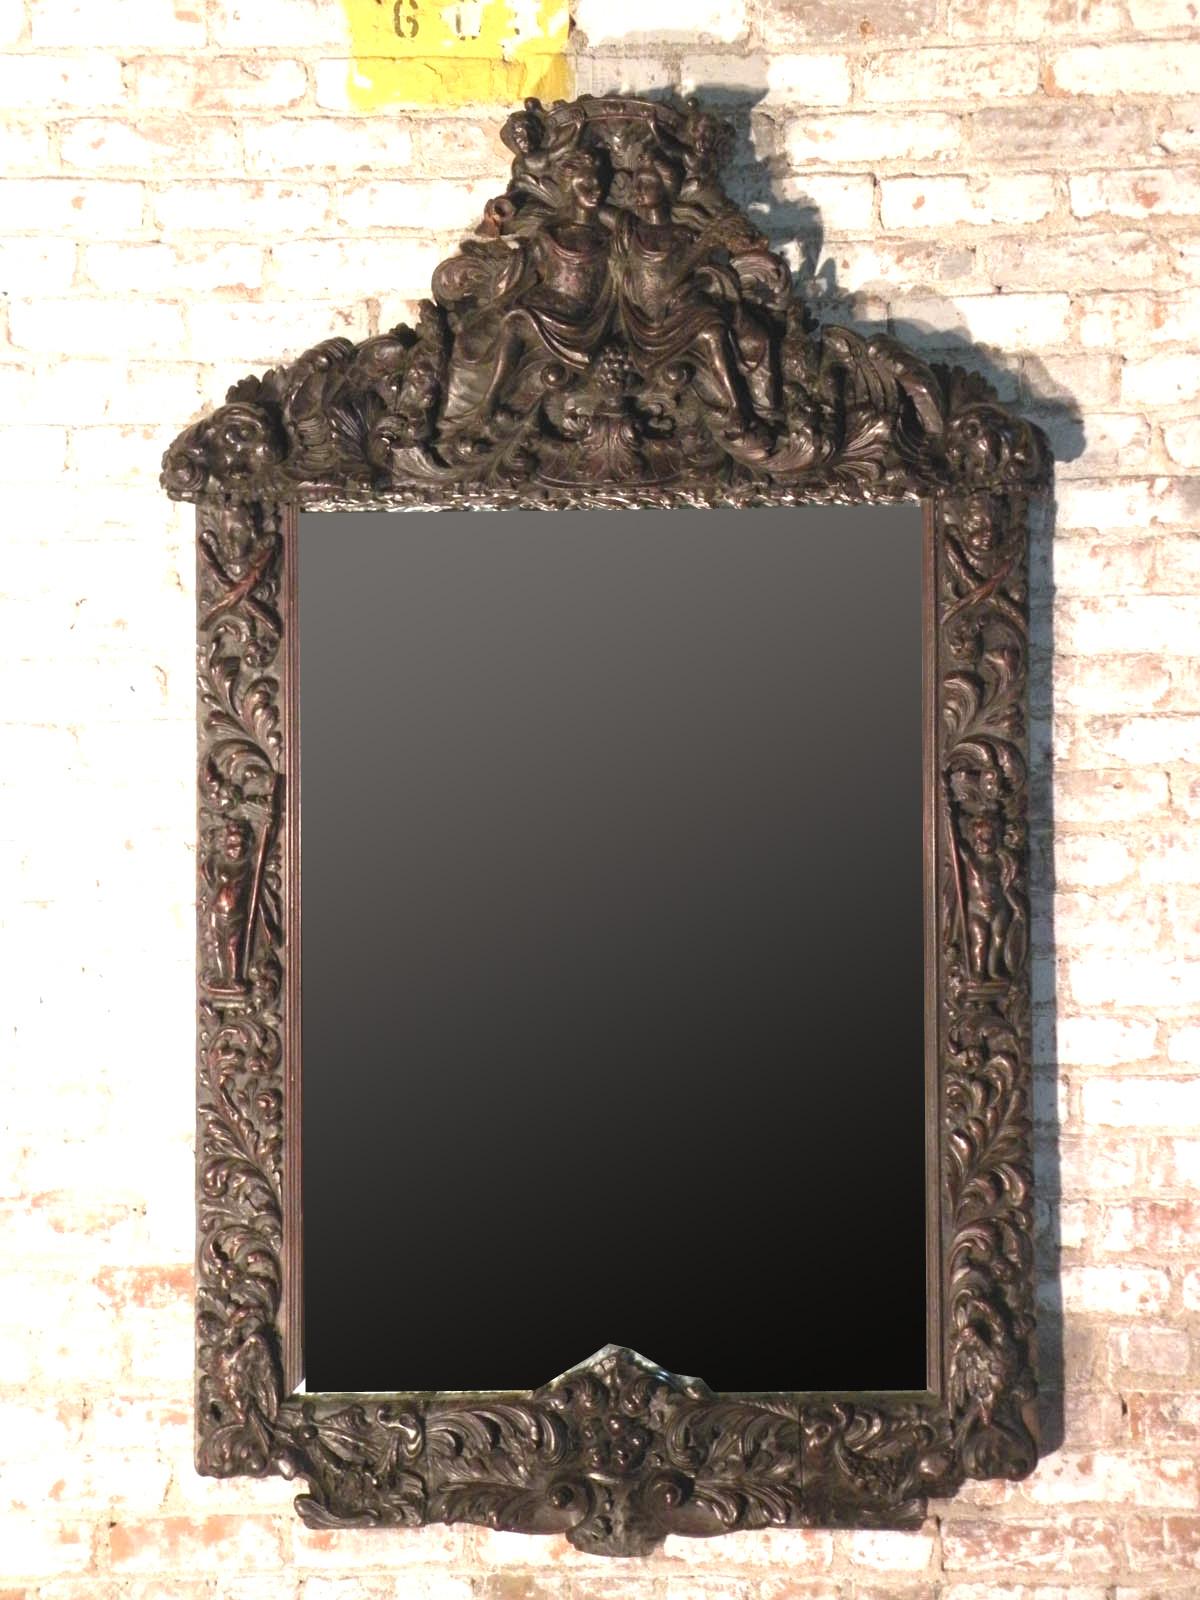 Very Decorative Late 17th century Exuberantly Carved Walnut Mirror in the Manner of Daniel Marot.
